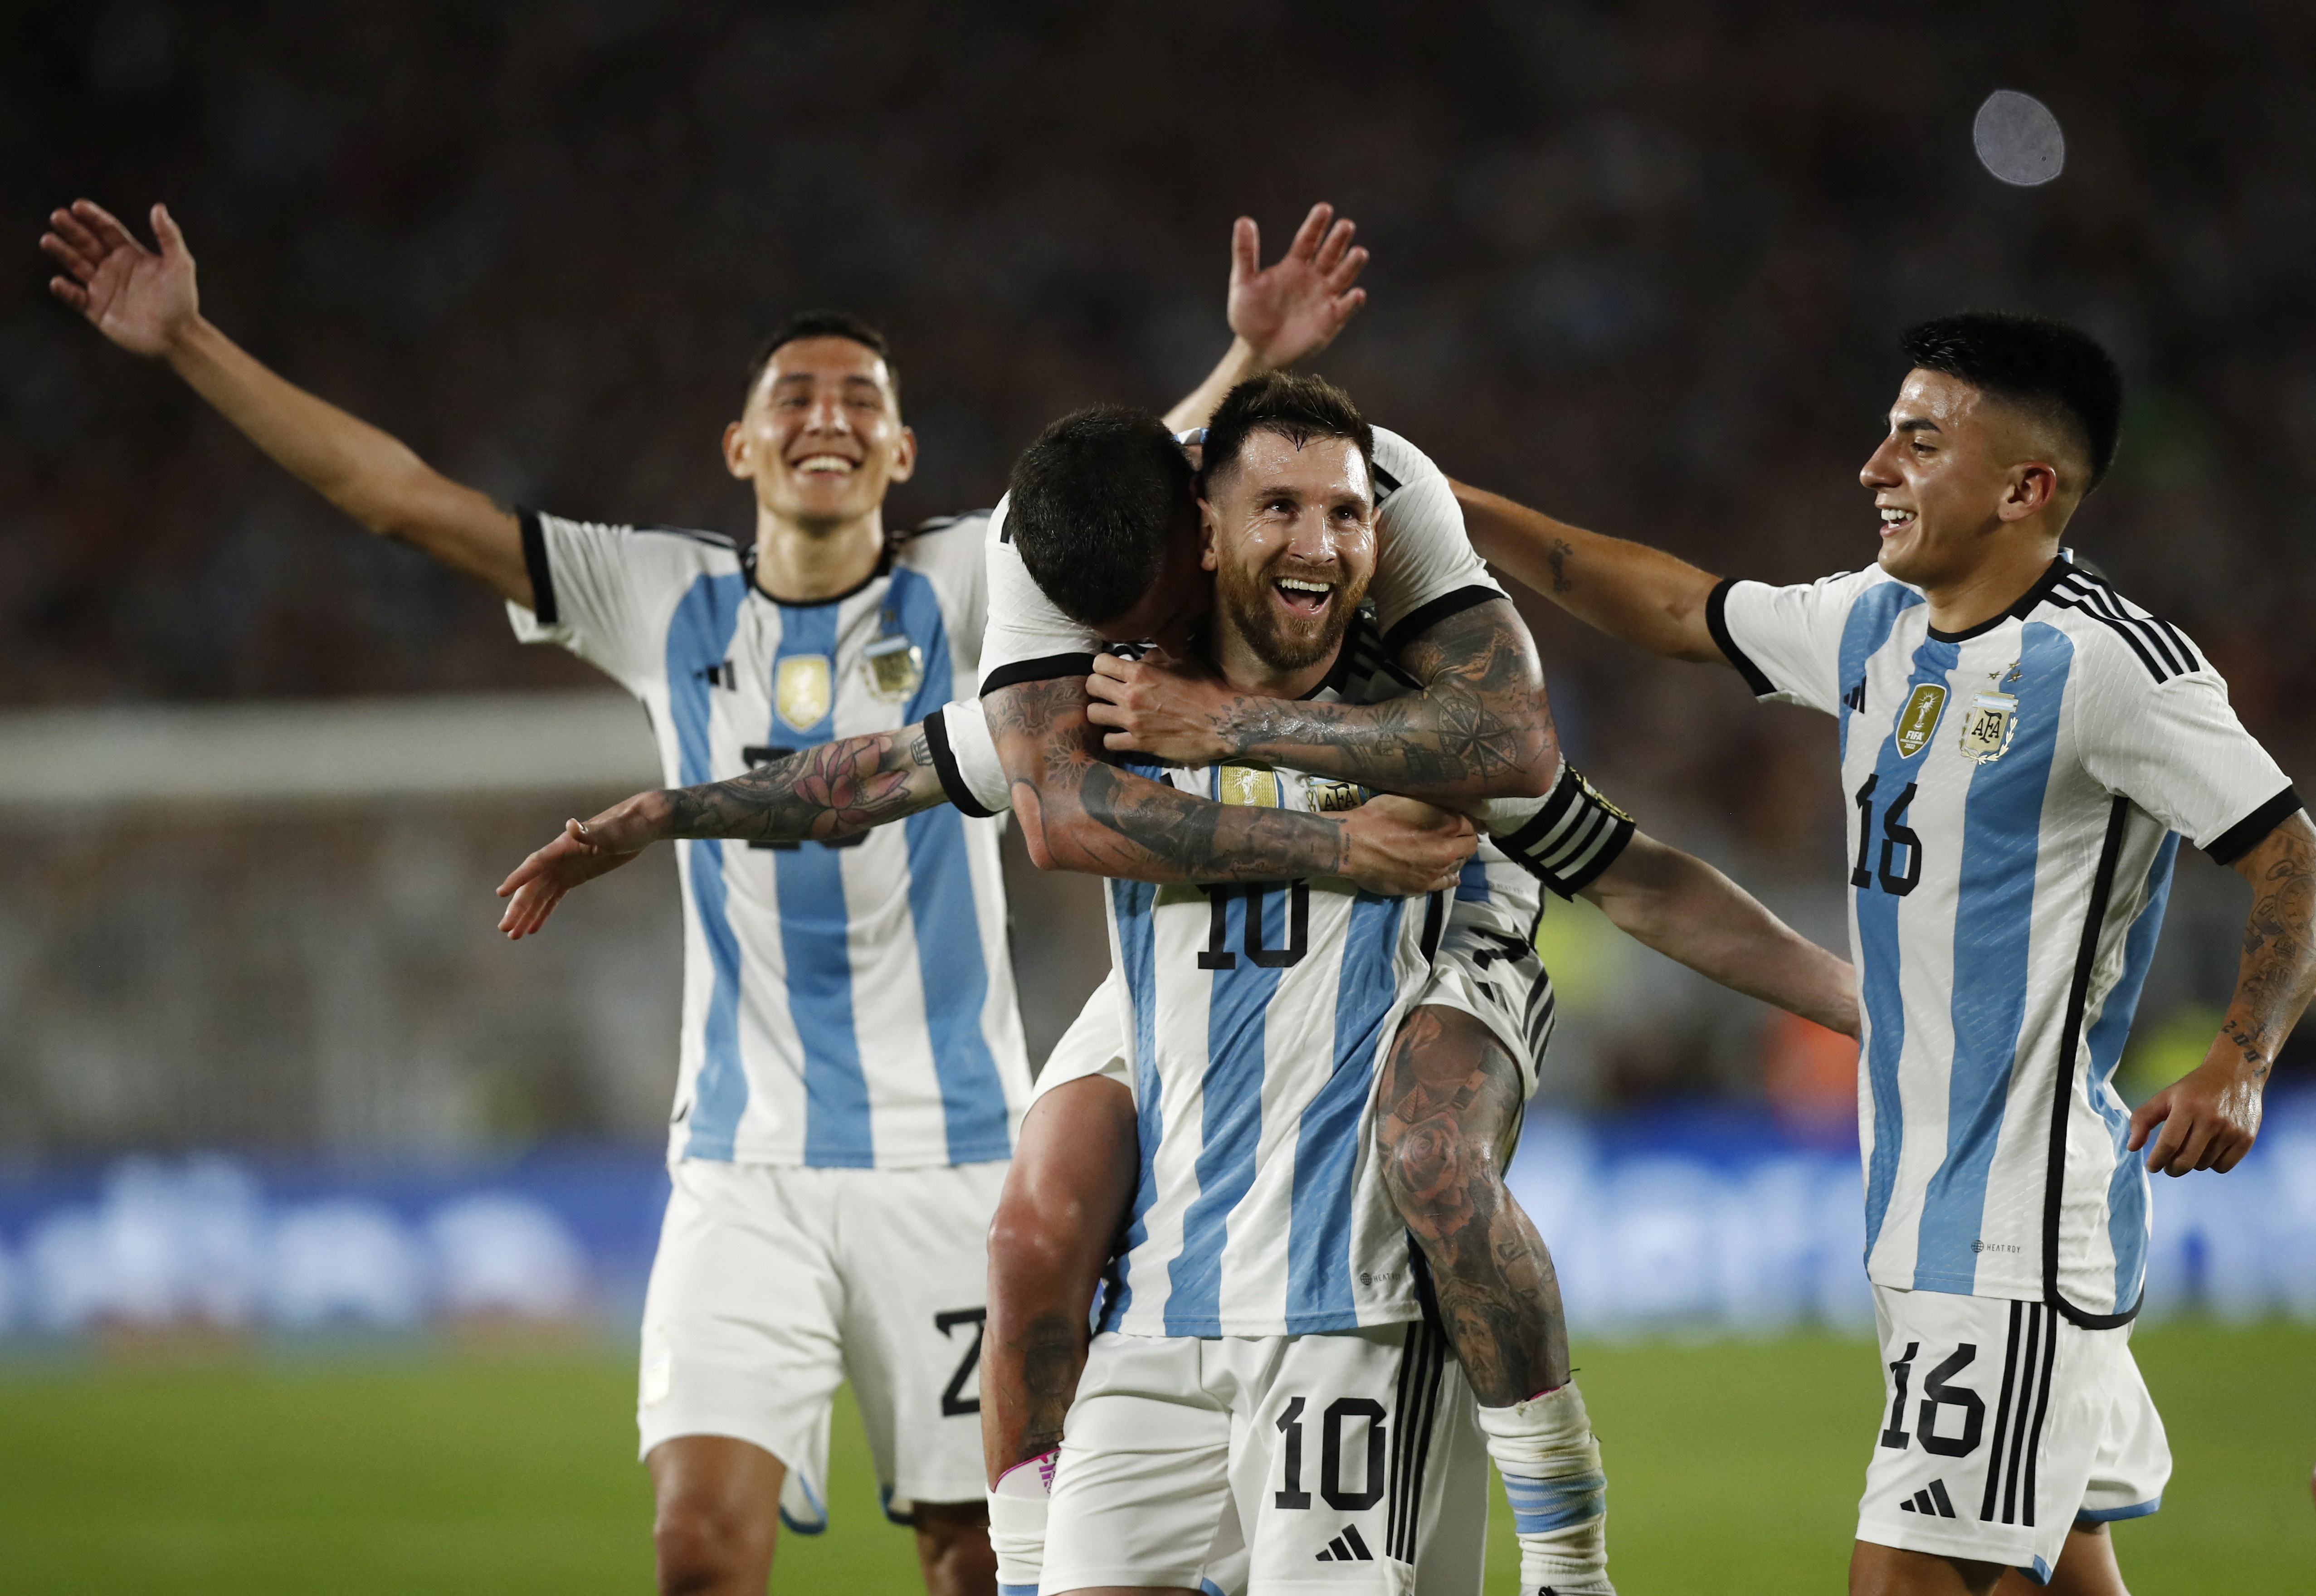 Soccer Football - International Friendly - Argentina v Panama - Estadio Monumental, Buenos Aires, Argentina - March 23, 2023 Argentina's Lionel Messi celebrates scoring their second goal with teammates REUTERS/Agustin Marcarian